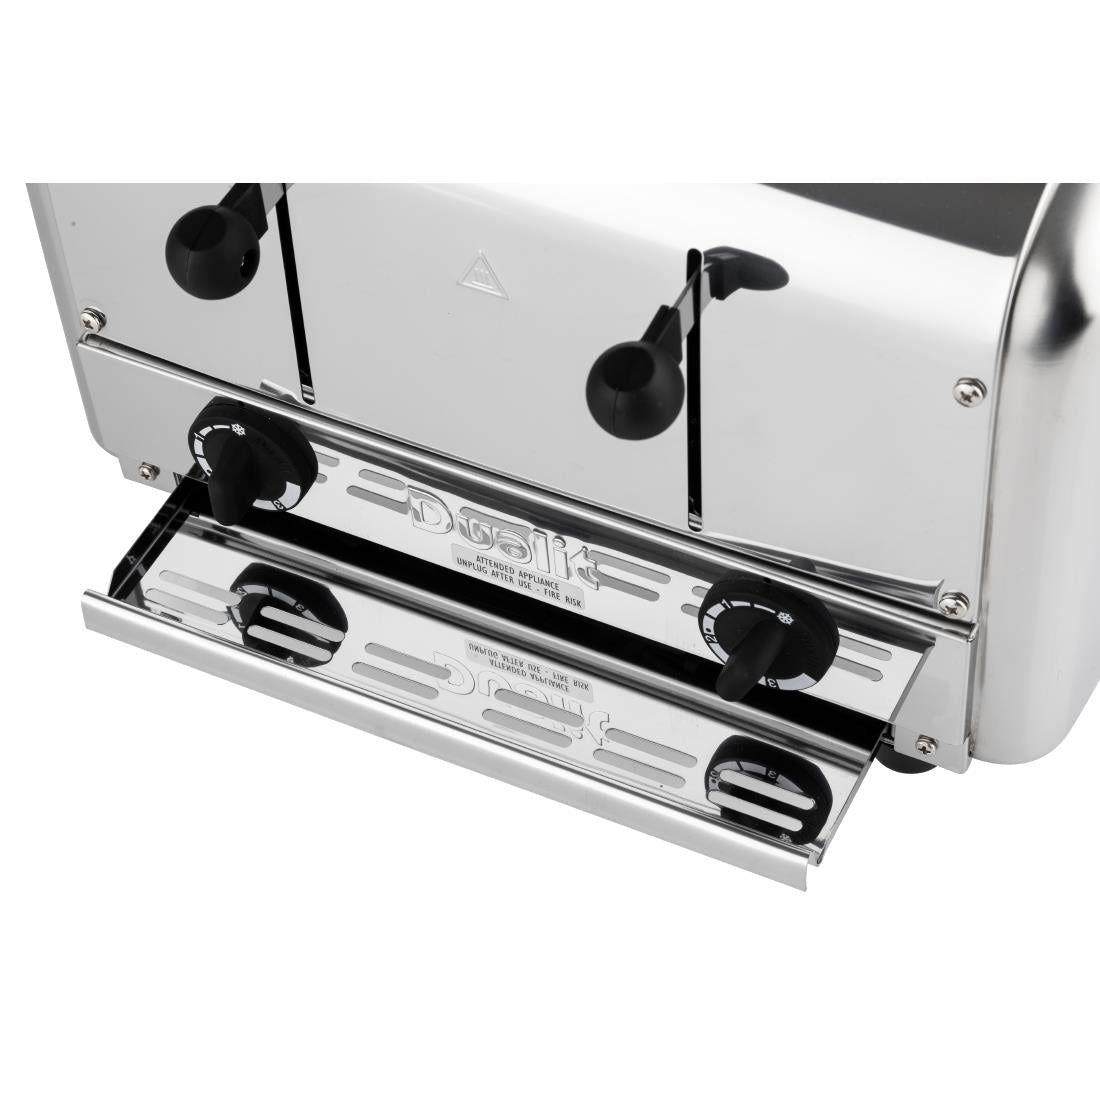 DK840 Dualit Catering 4 Slice Toaster 49900 JD Catering Equipment Solutions Ltd